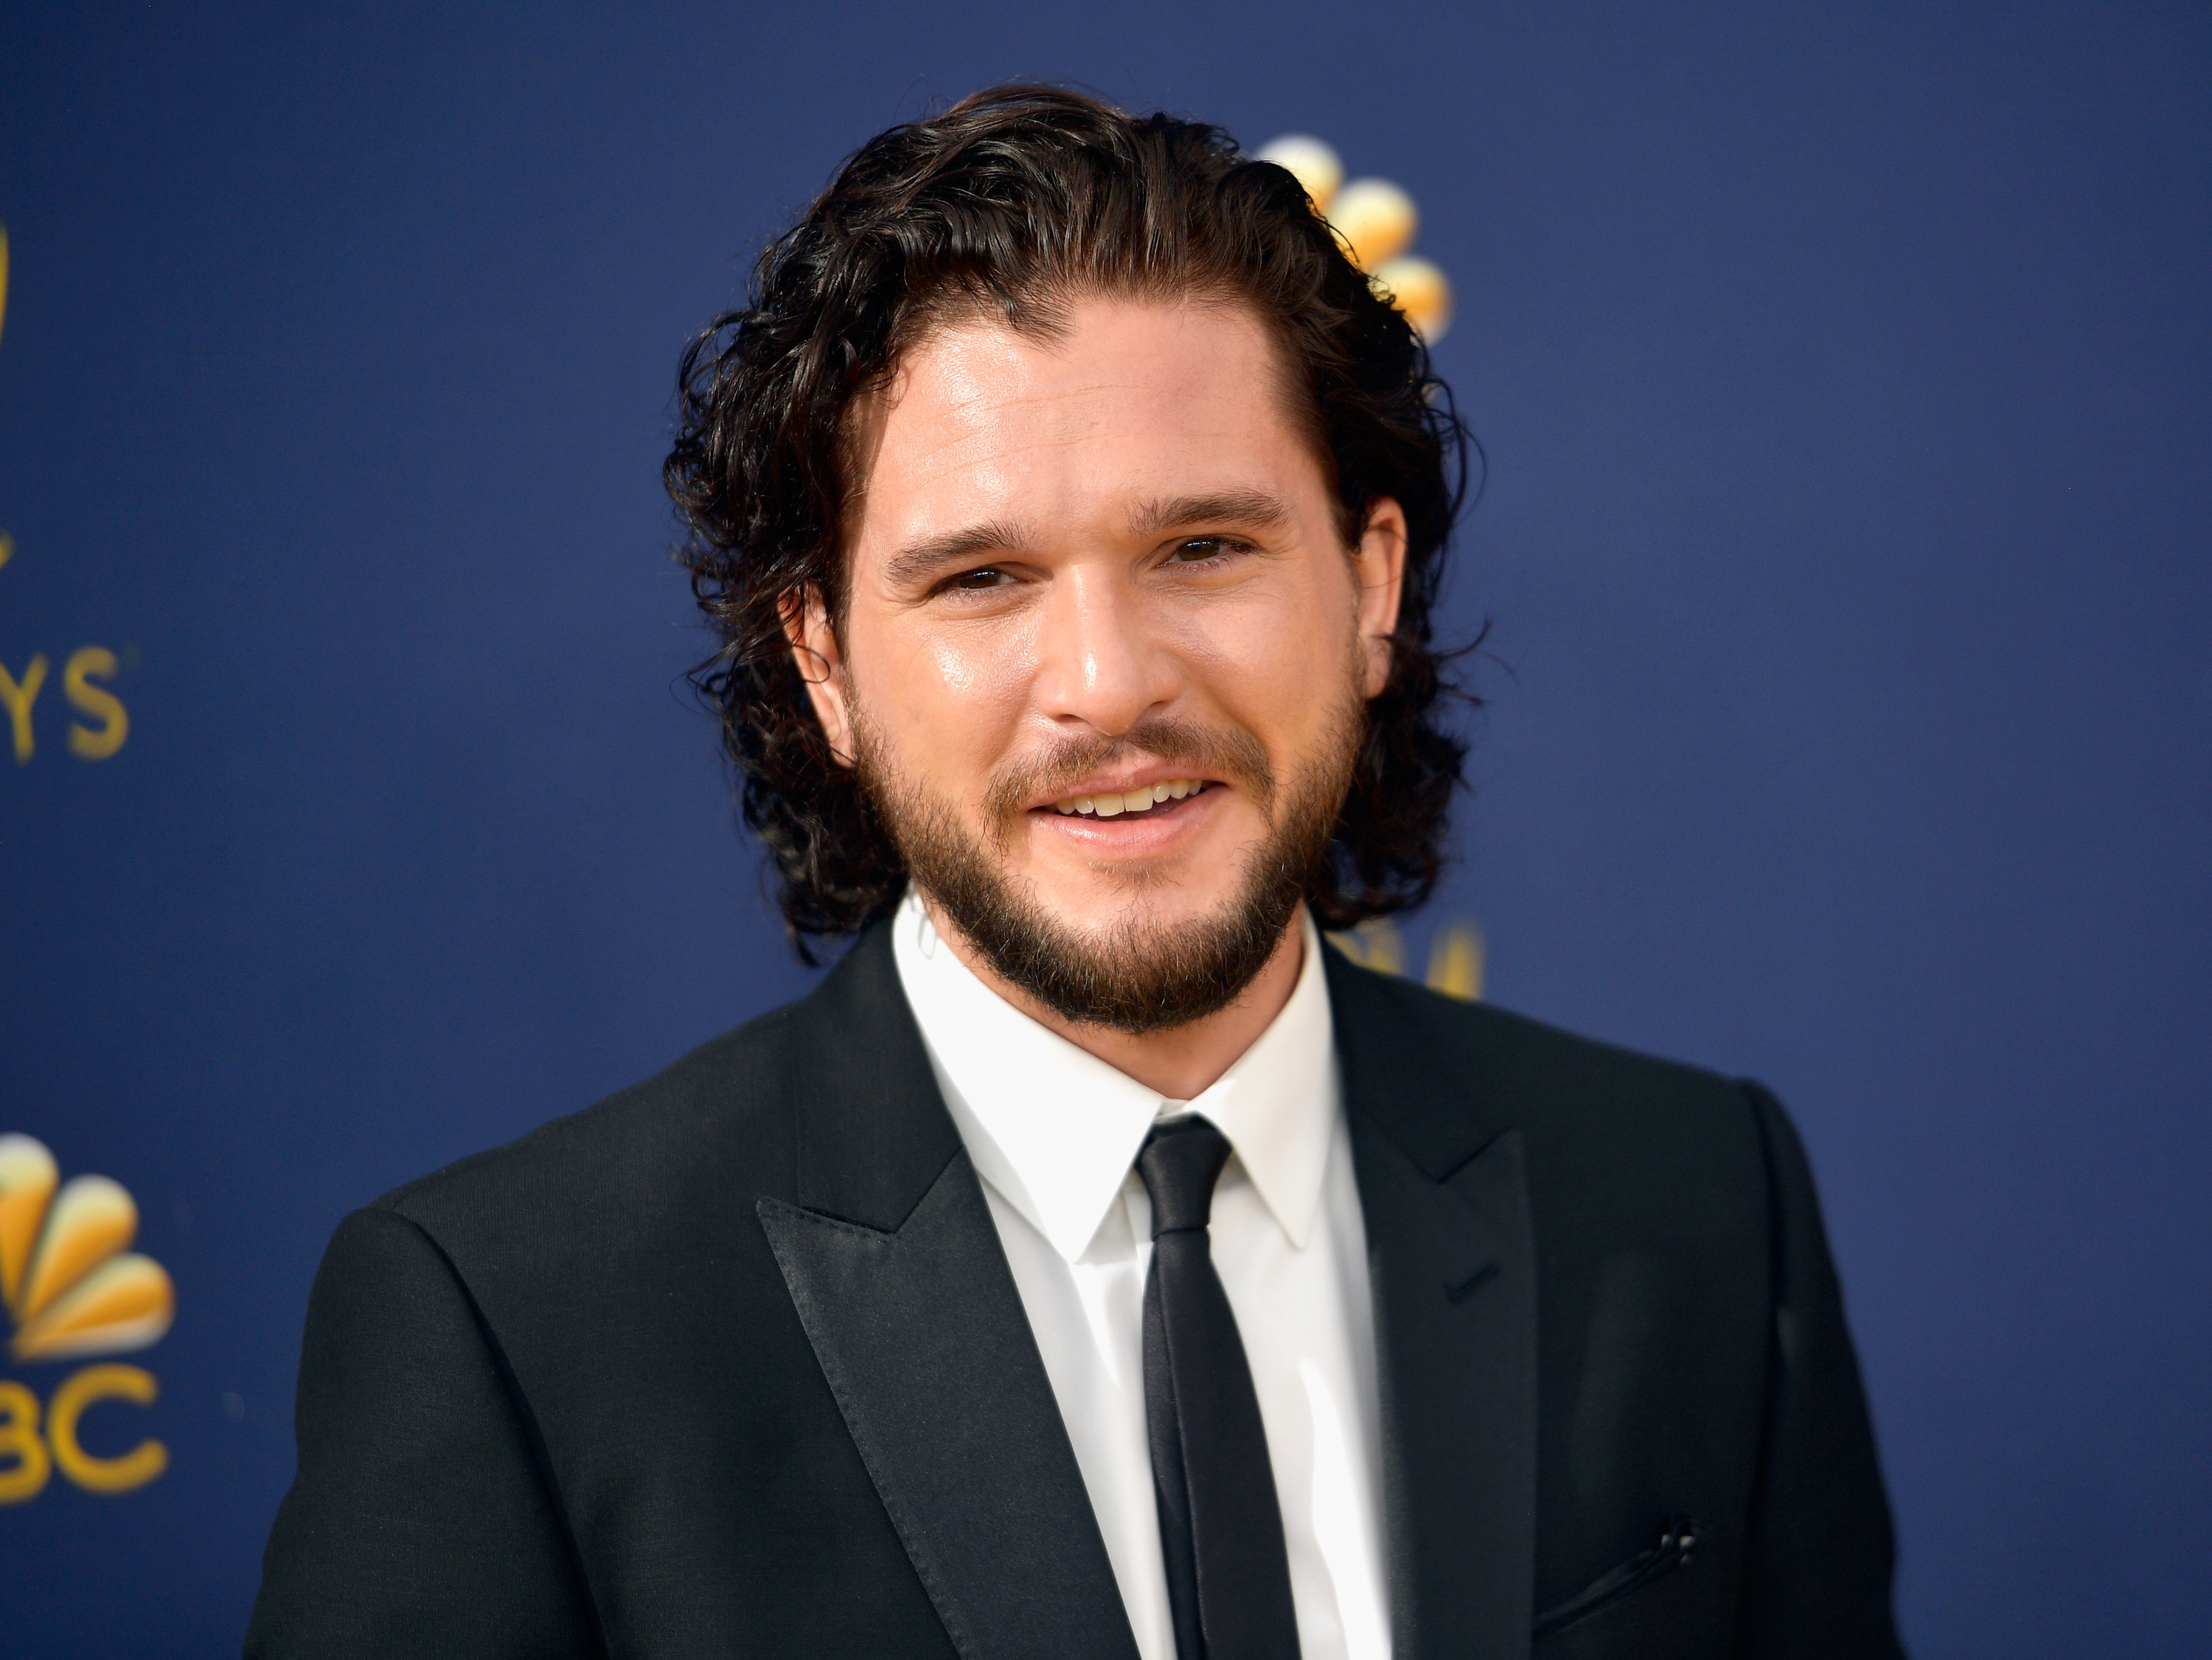 Kit wears a black suit and black tie at an event